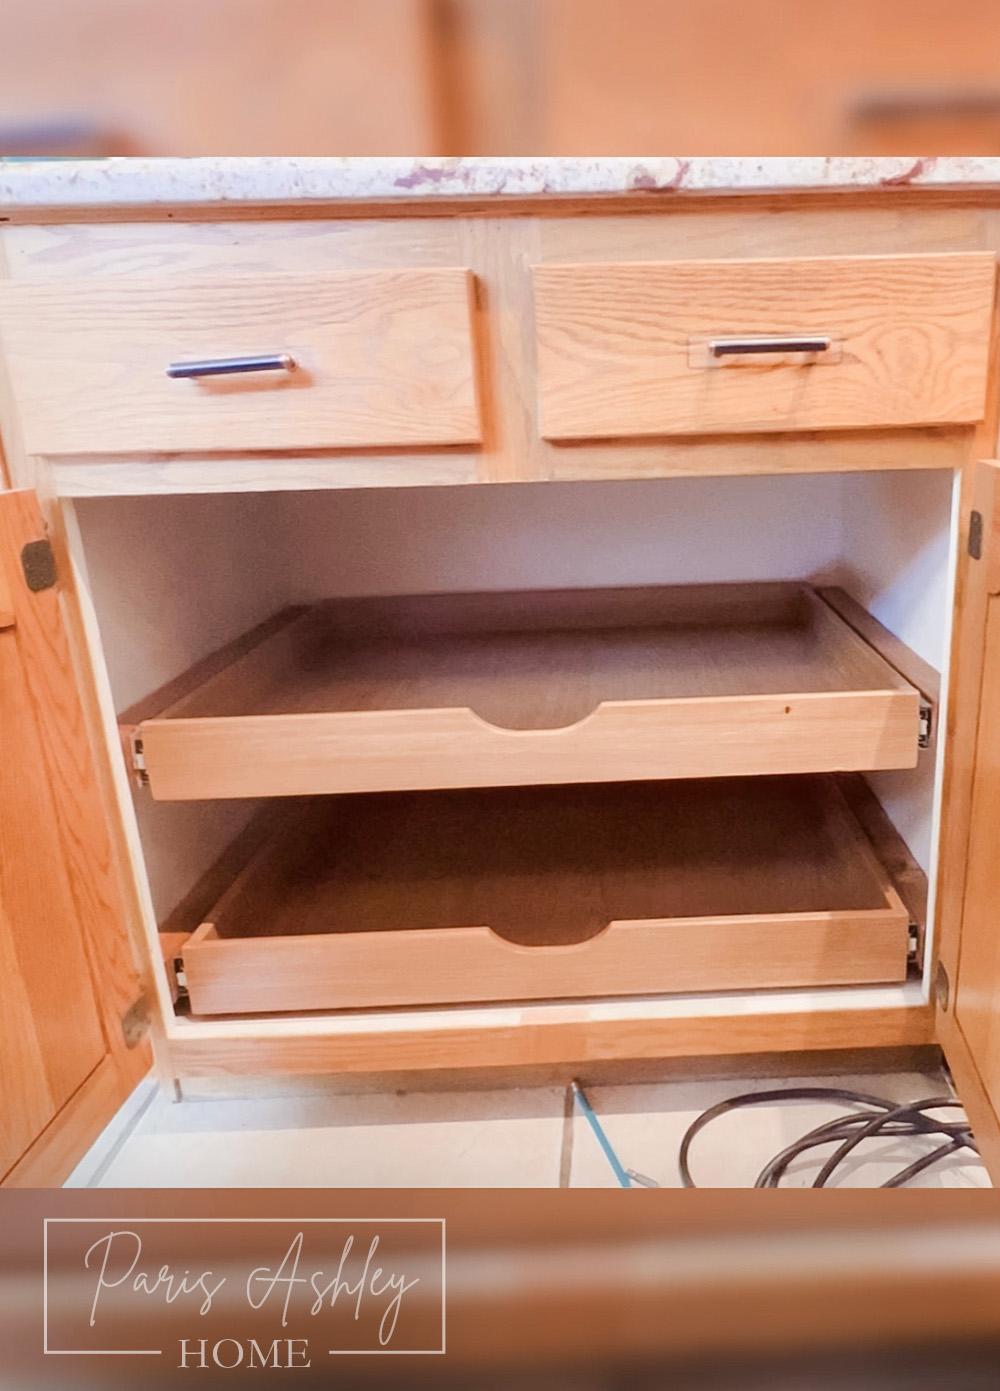 How to Convert Cabinet Shelves into Pull-Out Drawers – A Step-by-Step Guide